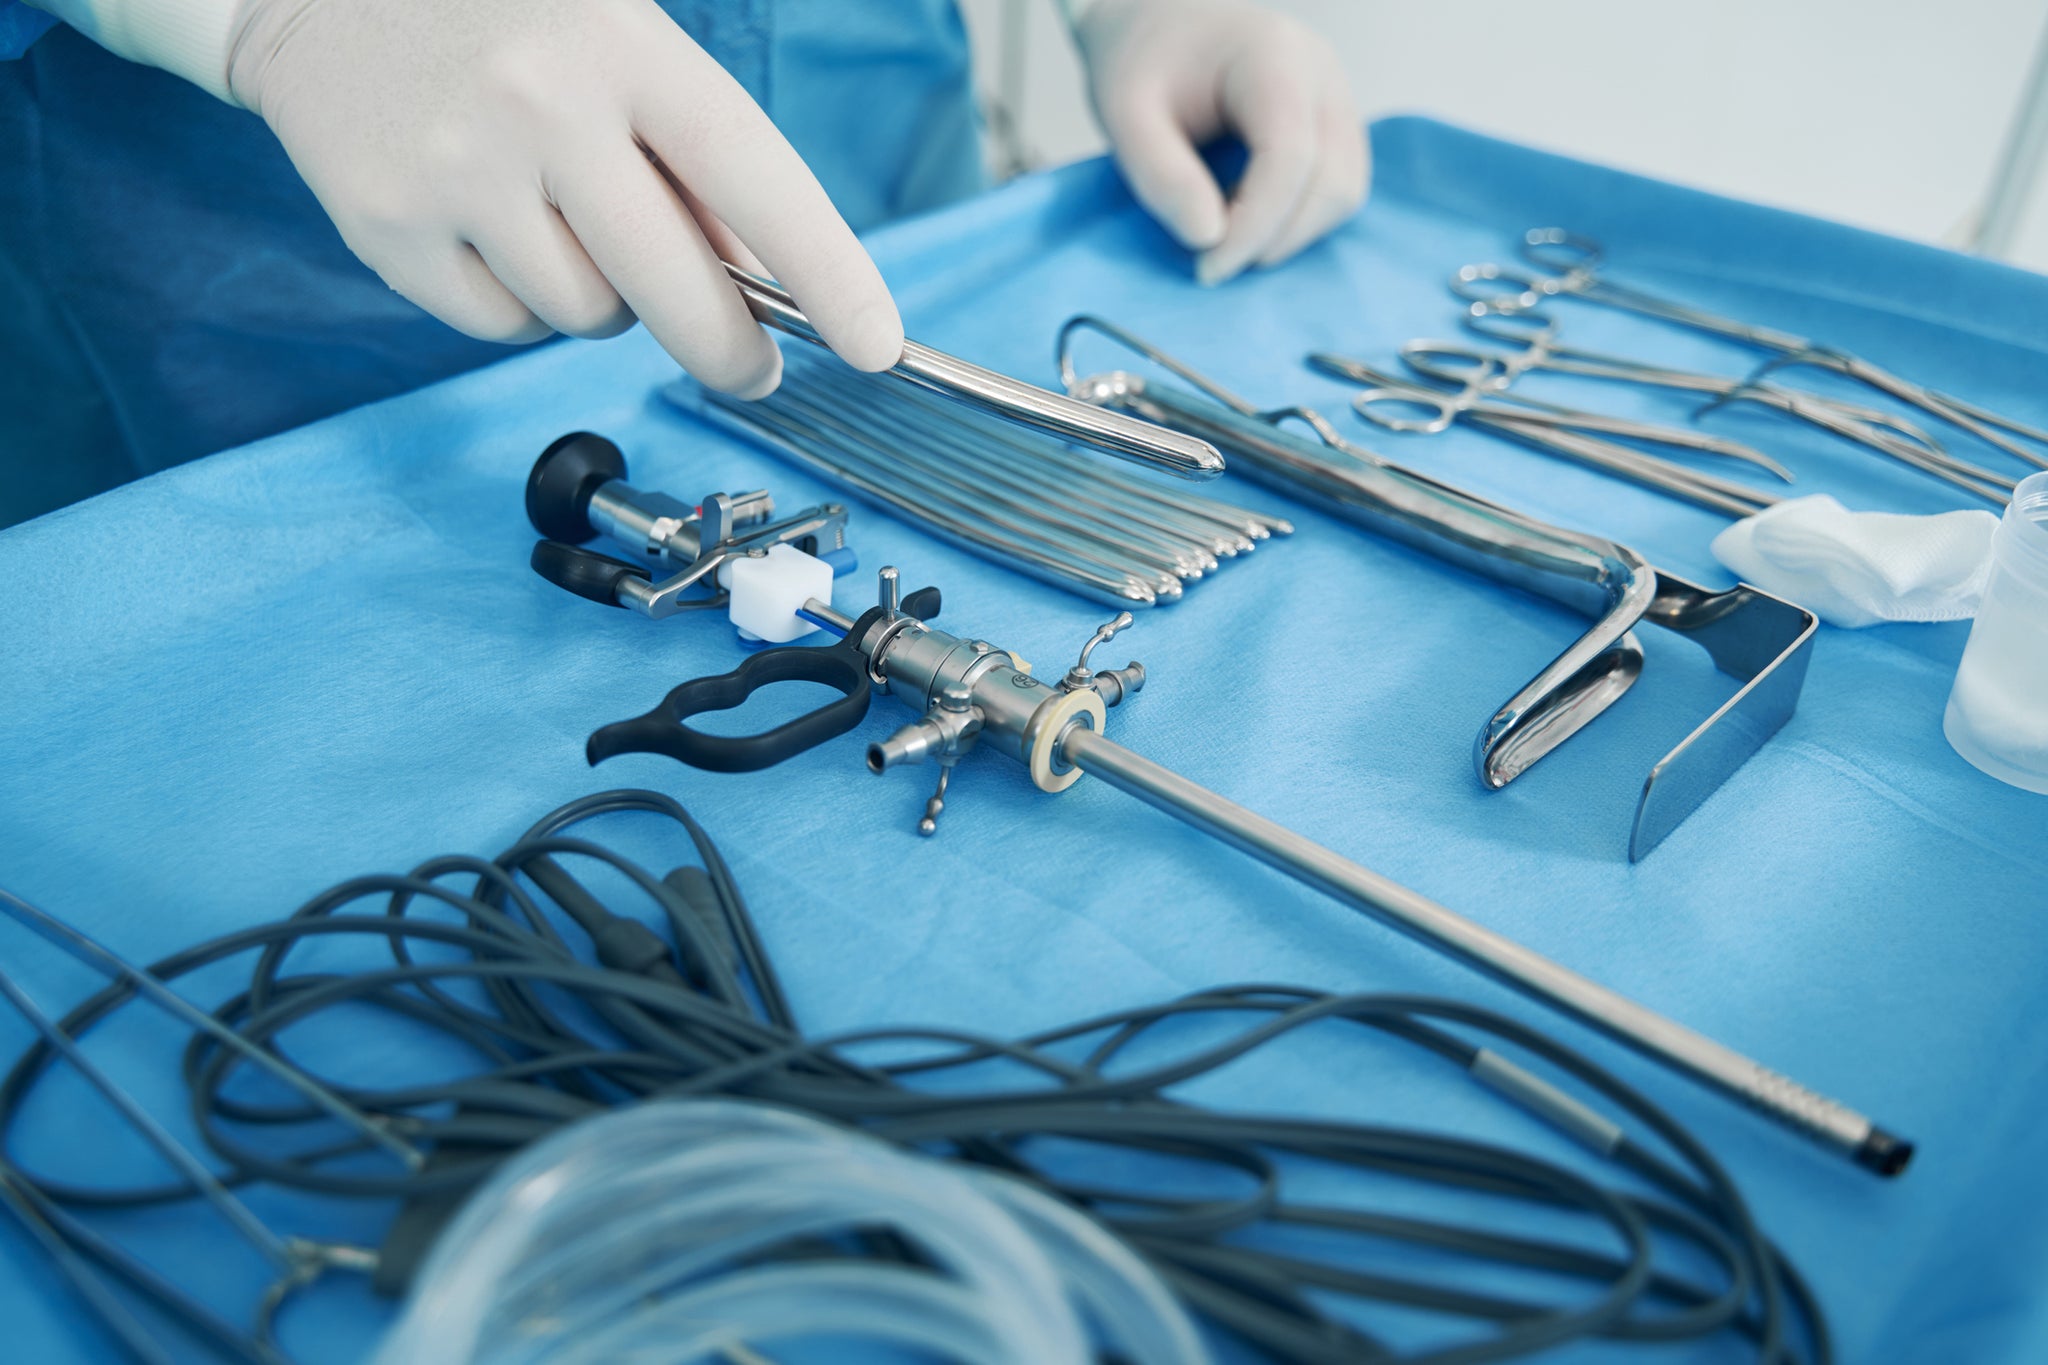 Instruments for urogynecological procedures laid out.